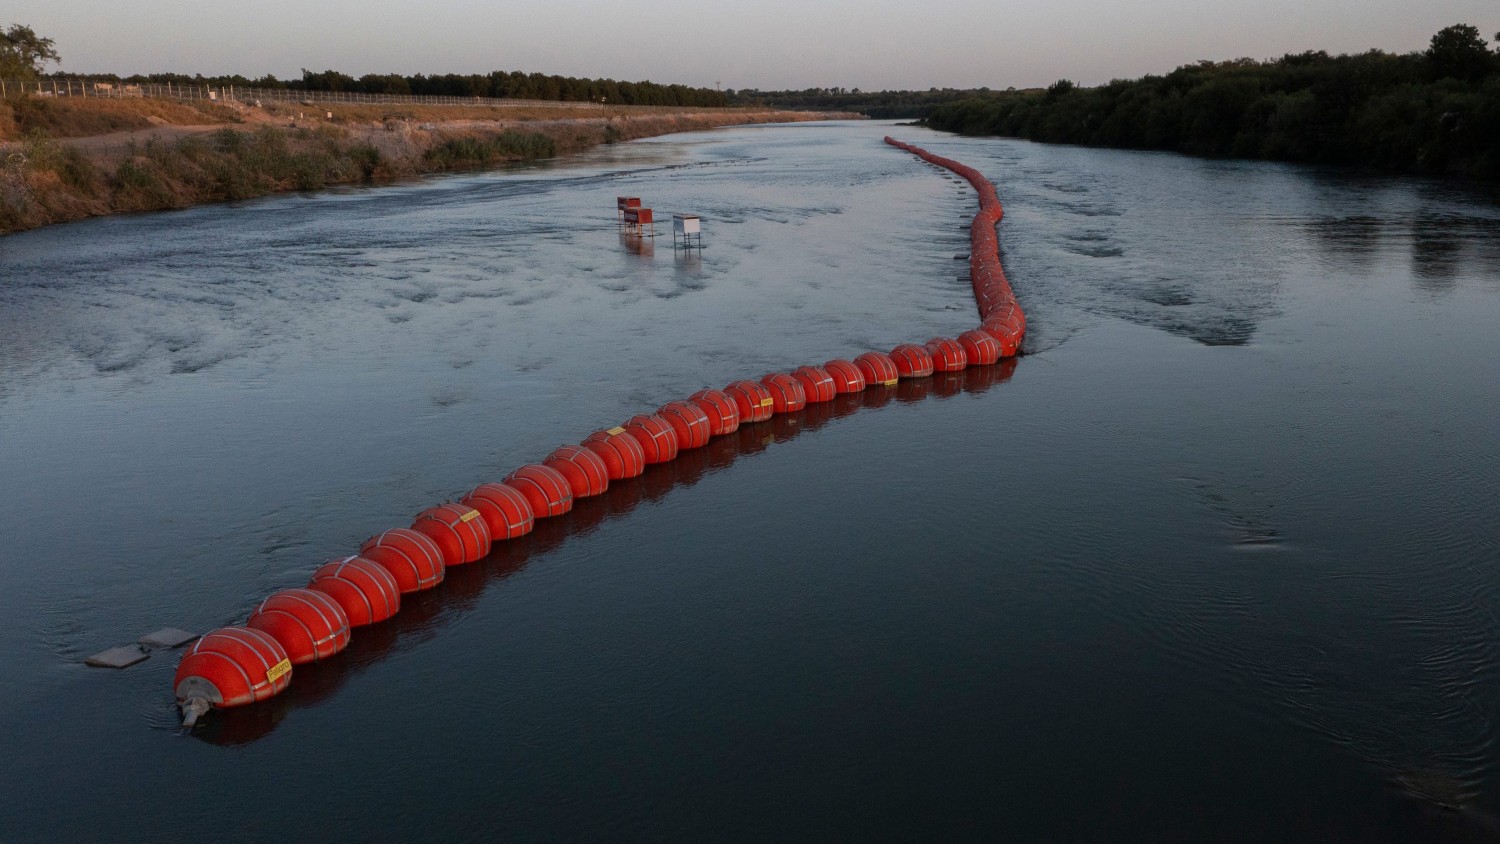 Omar Ornelas/El Paso Times/USA Today Network | Buoys placed by the state of Texas float on the Rio Grande international boundary between Mexico and the US in Eagle Pass, Texas, on July 21, 2023.